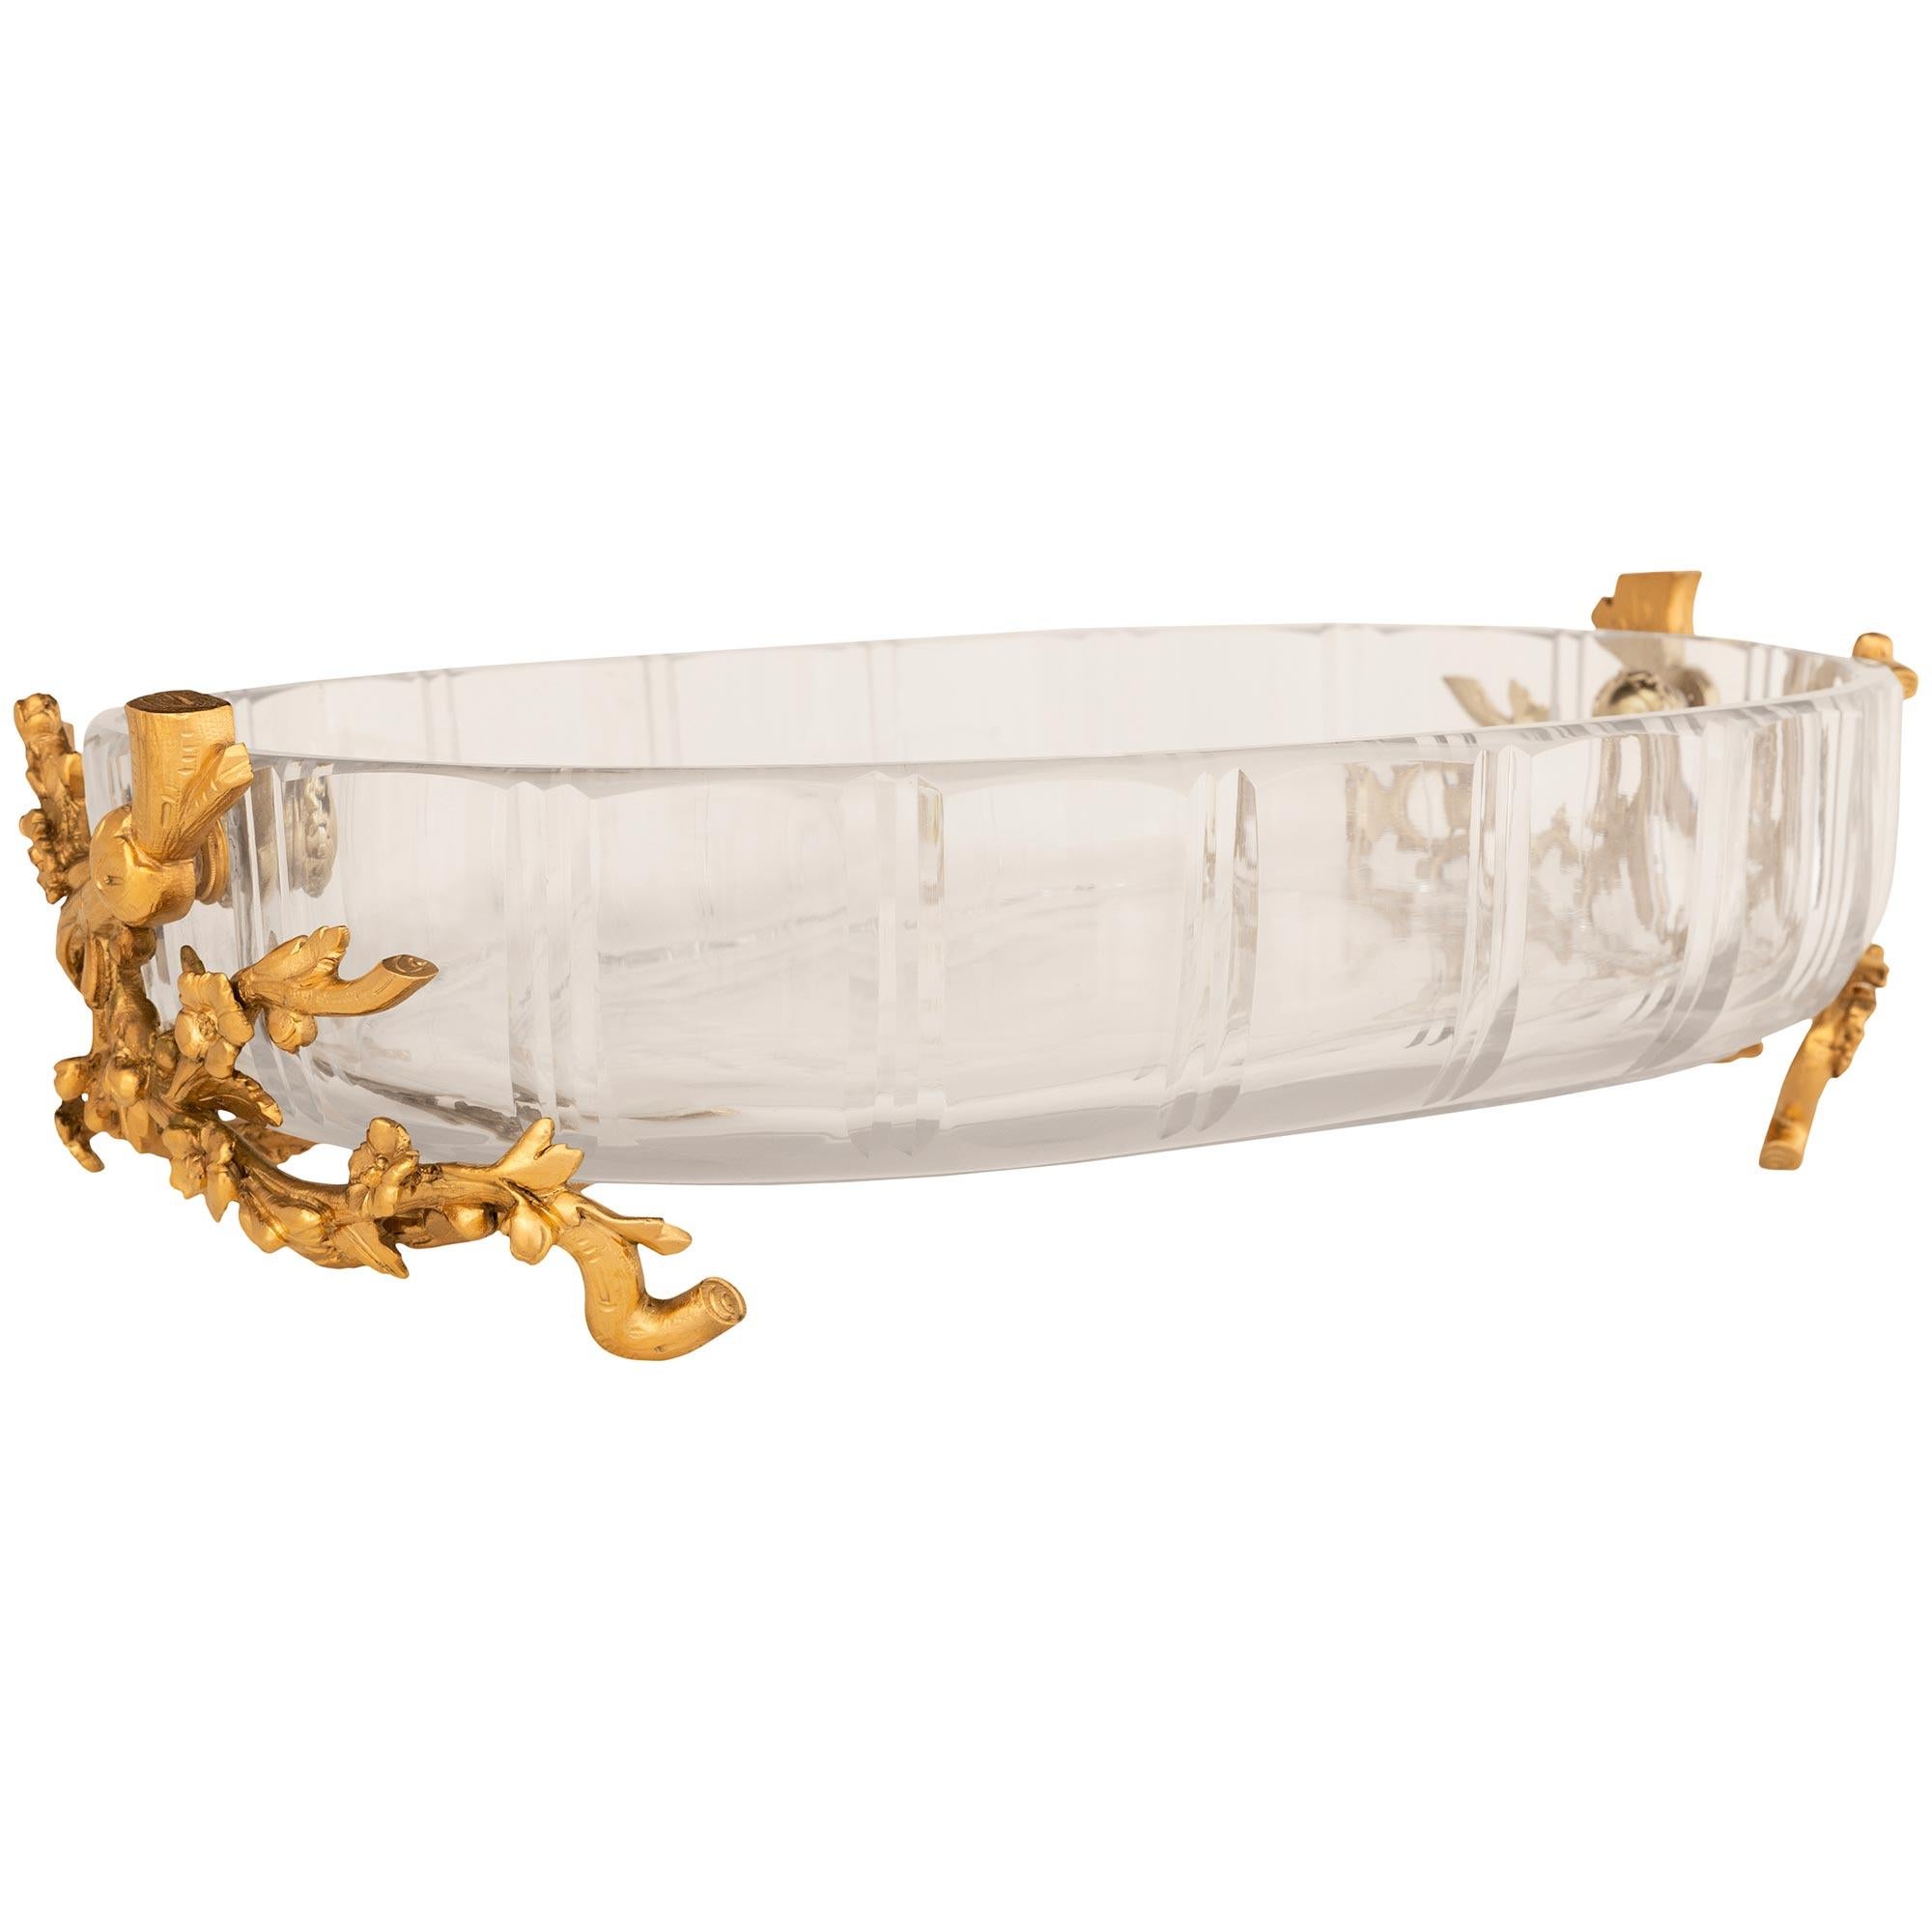 French 19th Century Belle Epoque Period Baccarat Crystal And Ormolu Centerpiece In Good Condition For Sale In West Palm Beach, FL